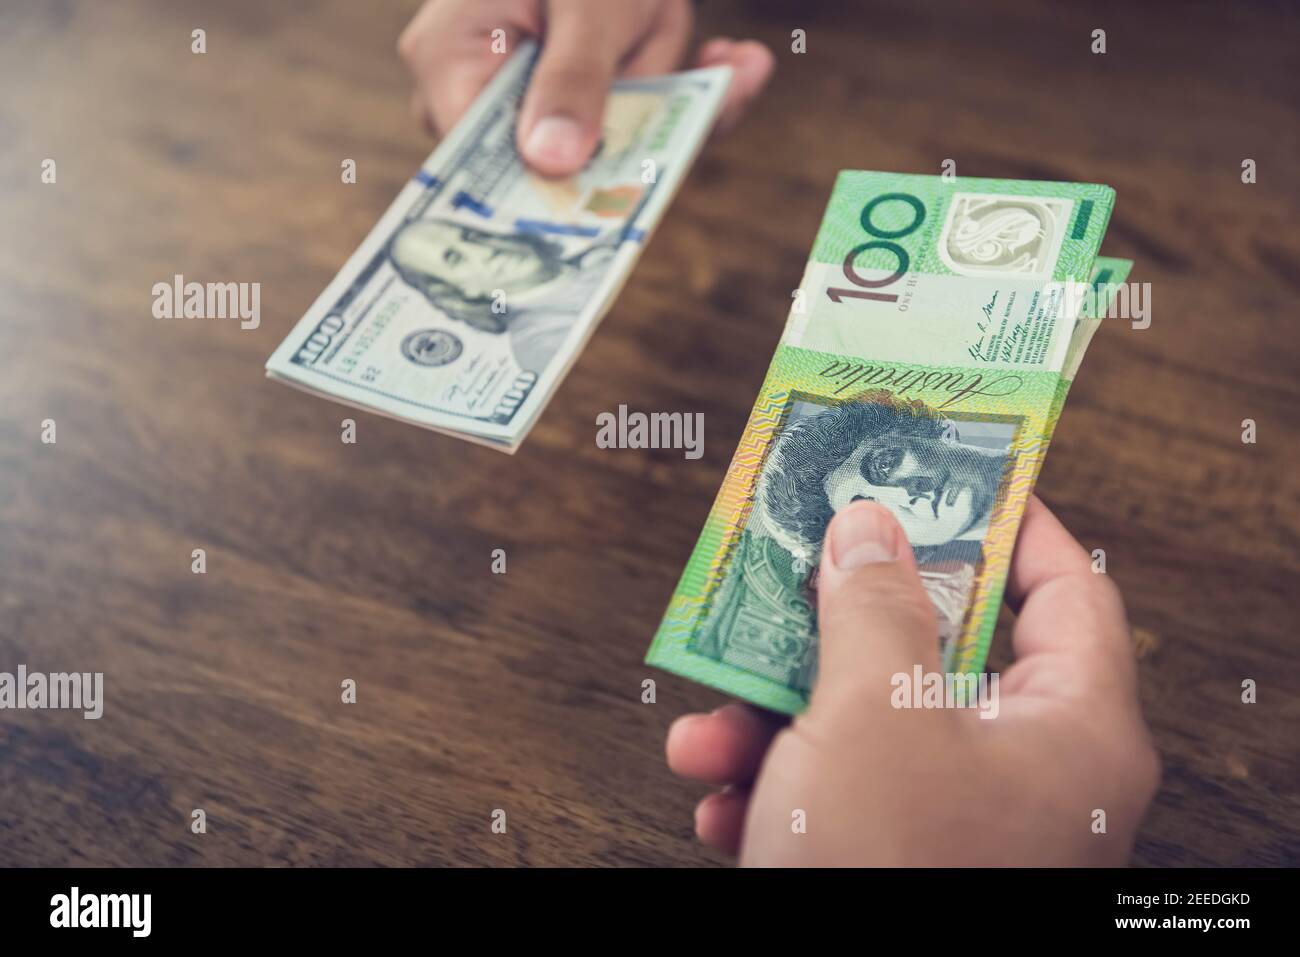 Exchanging money between US dollar (USD) and Australian dollar (AUD) banknotes Stock Photo